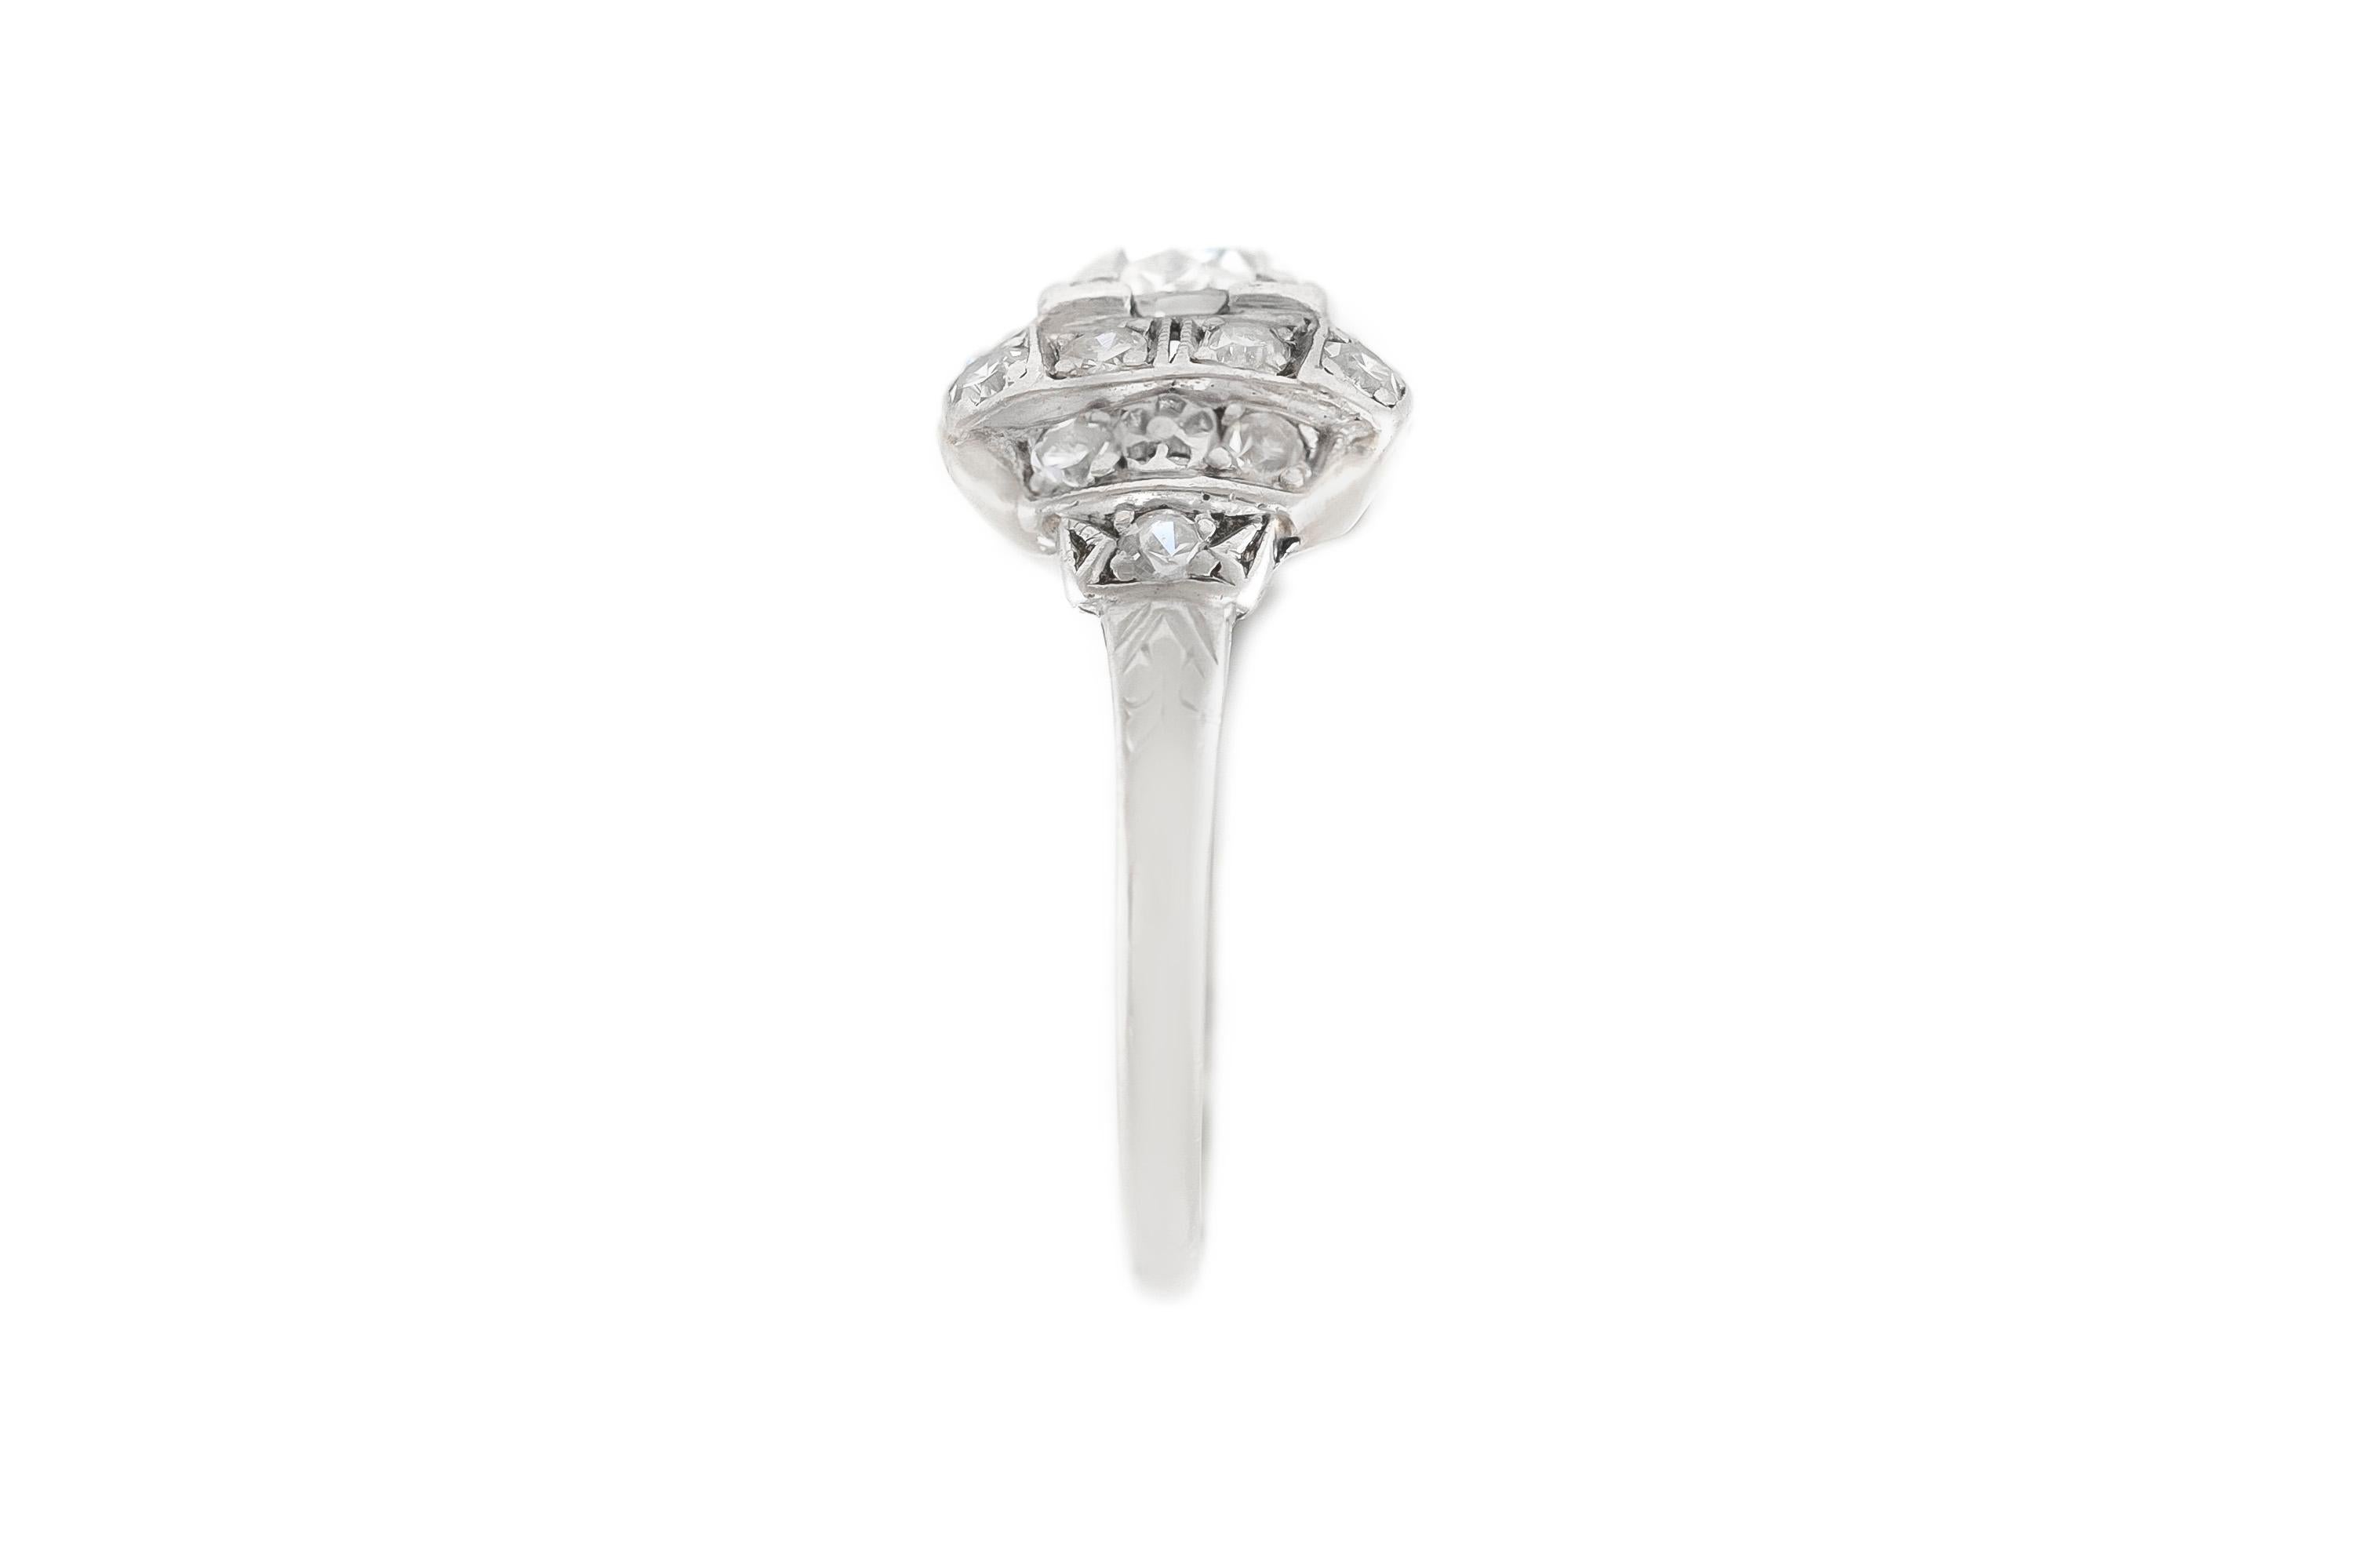 The beautiful ring i finely crafted in platinum with center dia 0.70 carat and around diamonds weighing approximately total of 0.50 carat.
Circa 1950.
Easy to resize